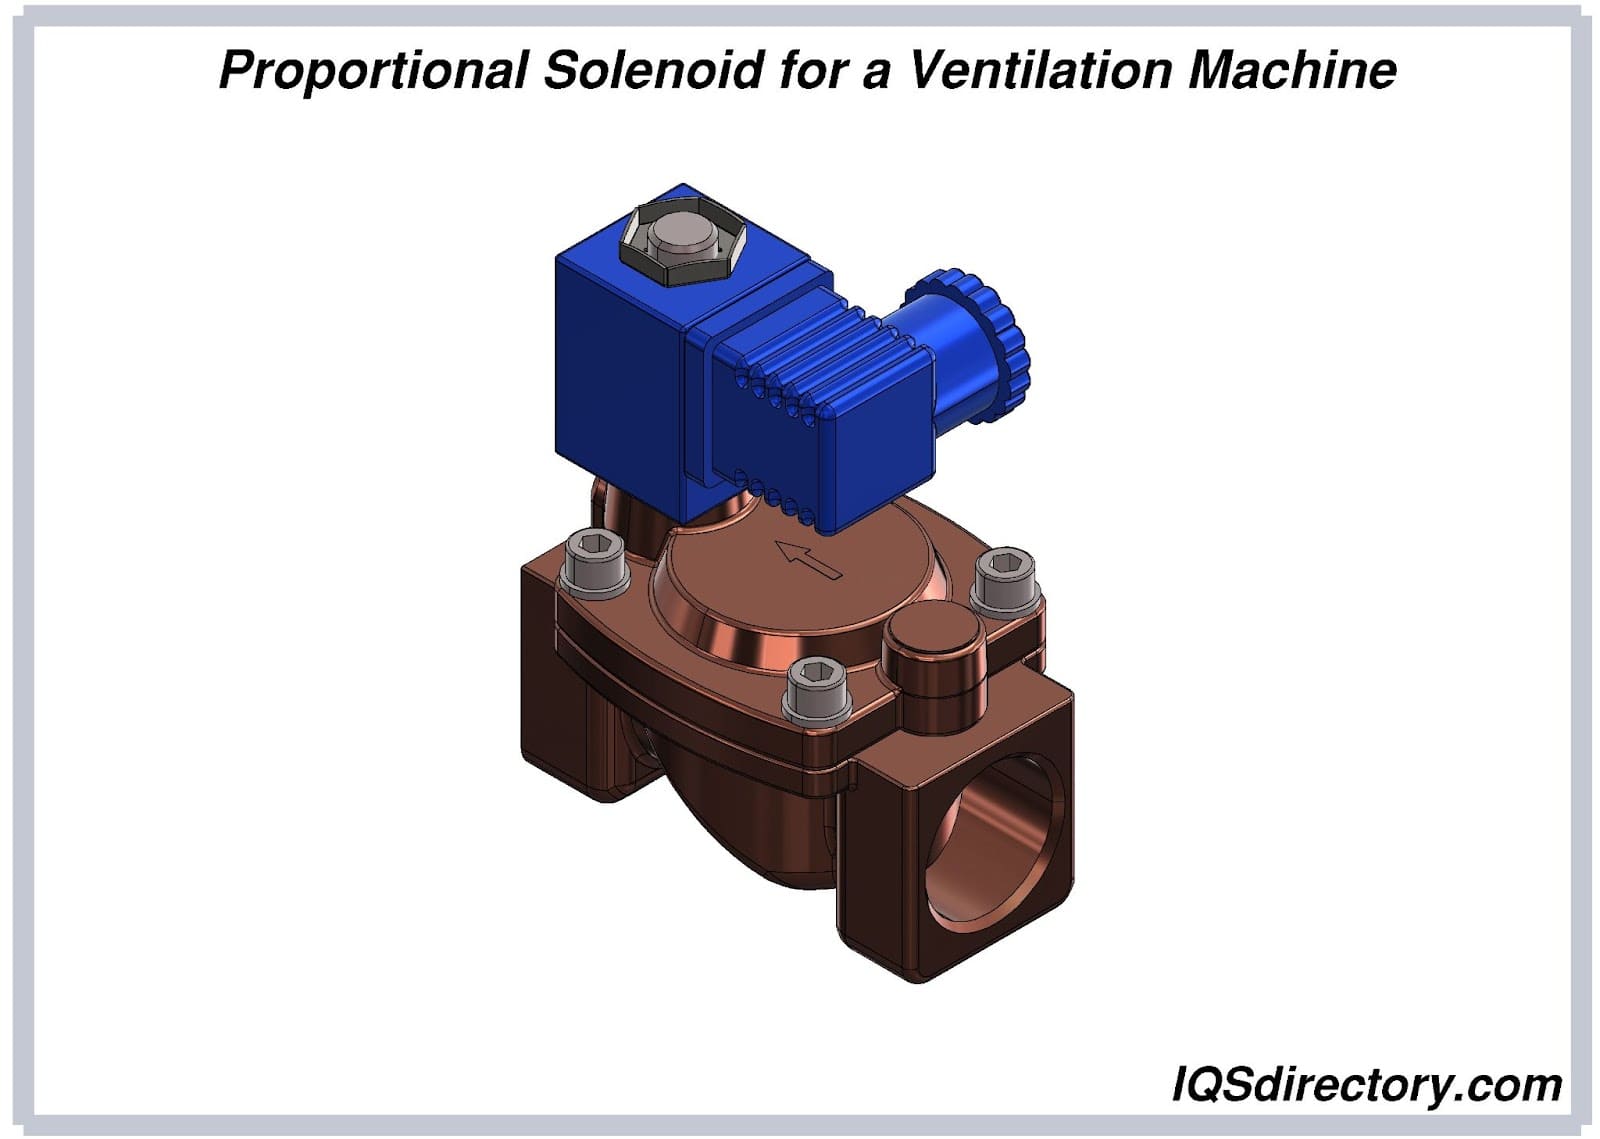 Proportional Solenoid for a Ventilation Machine